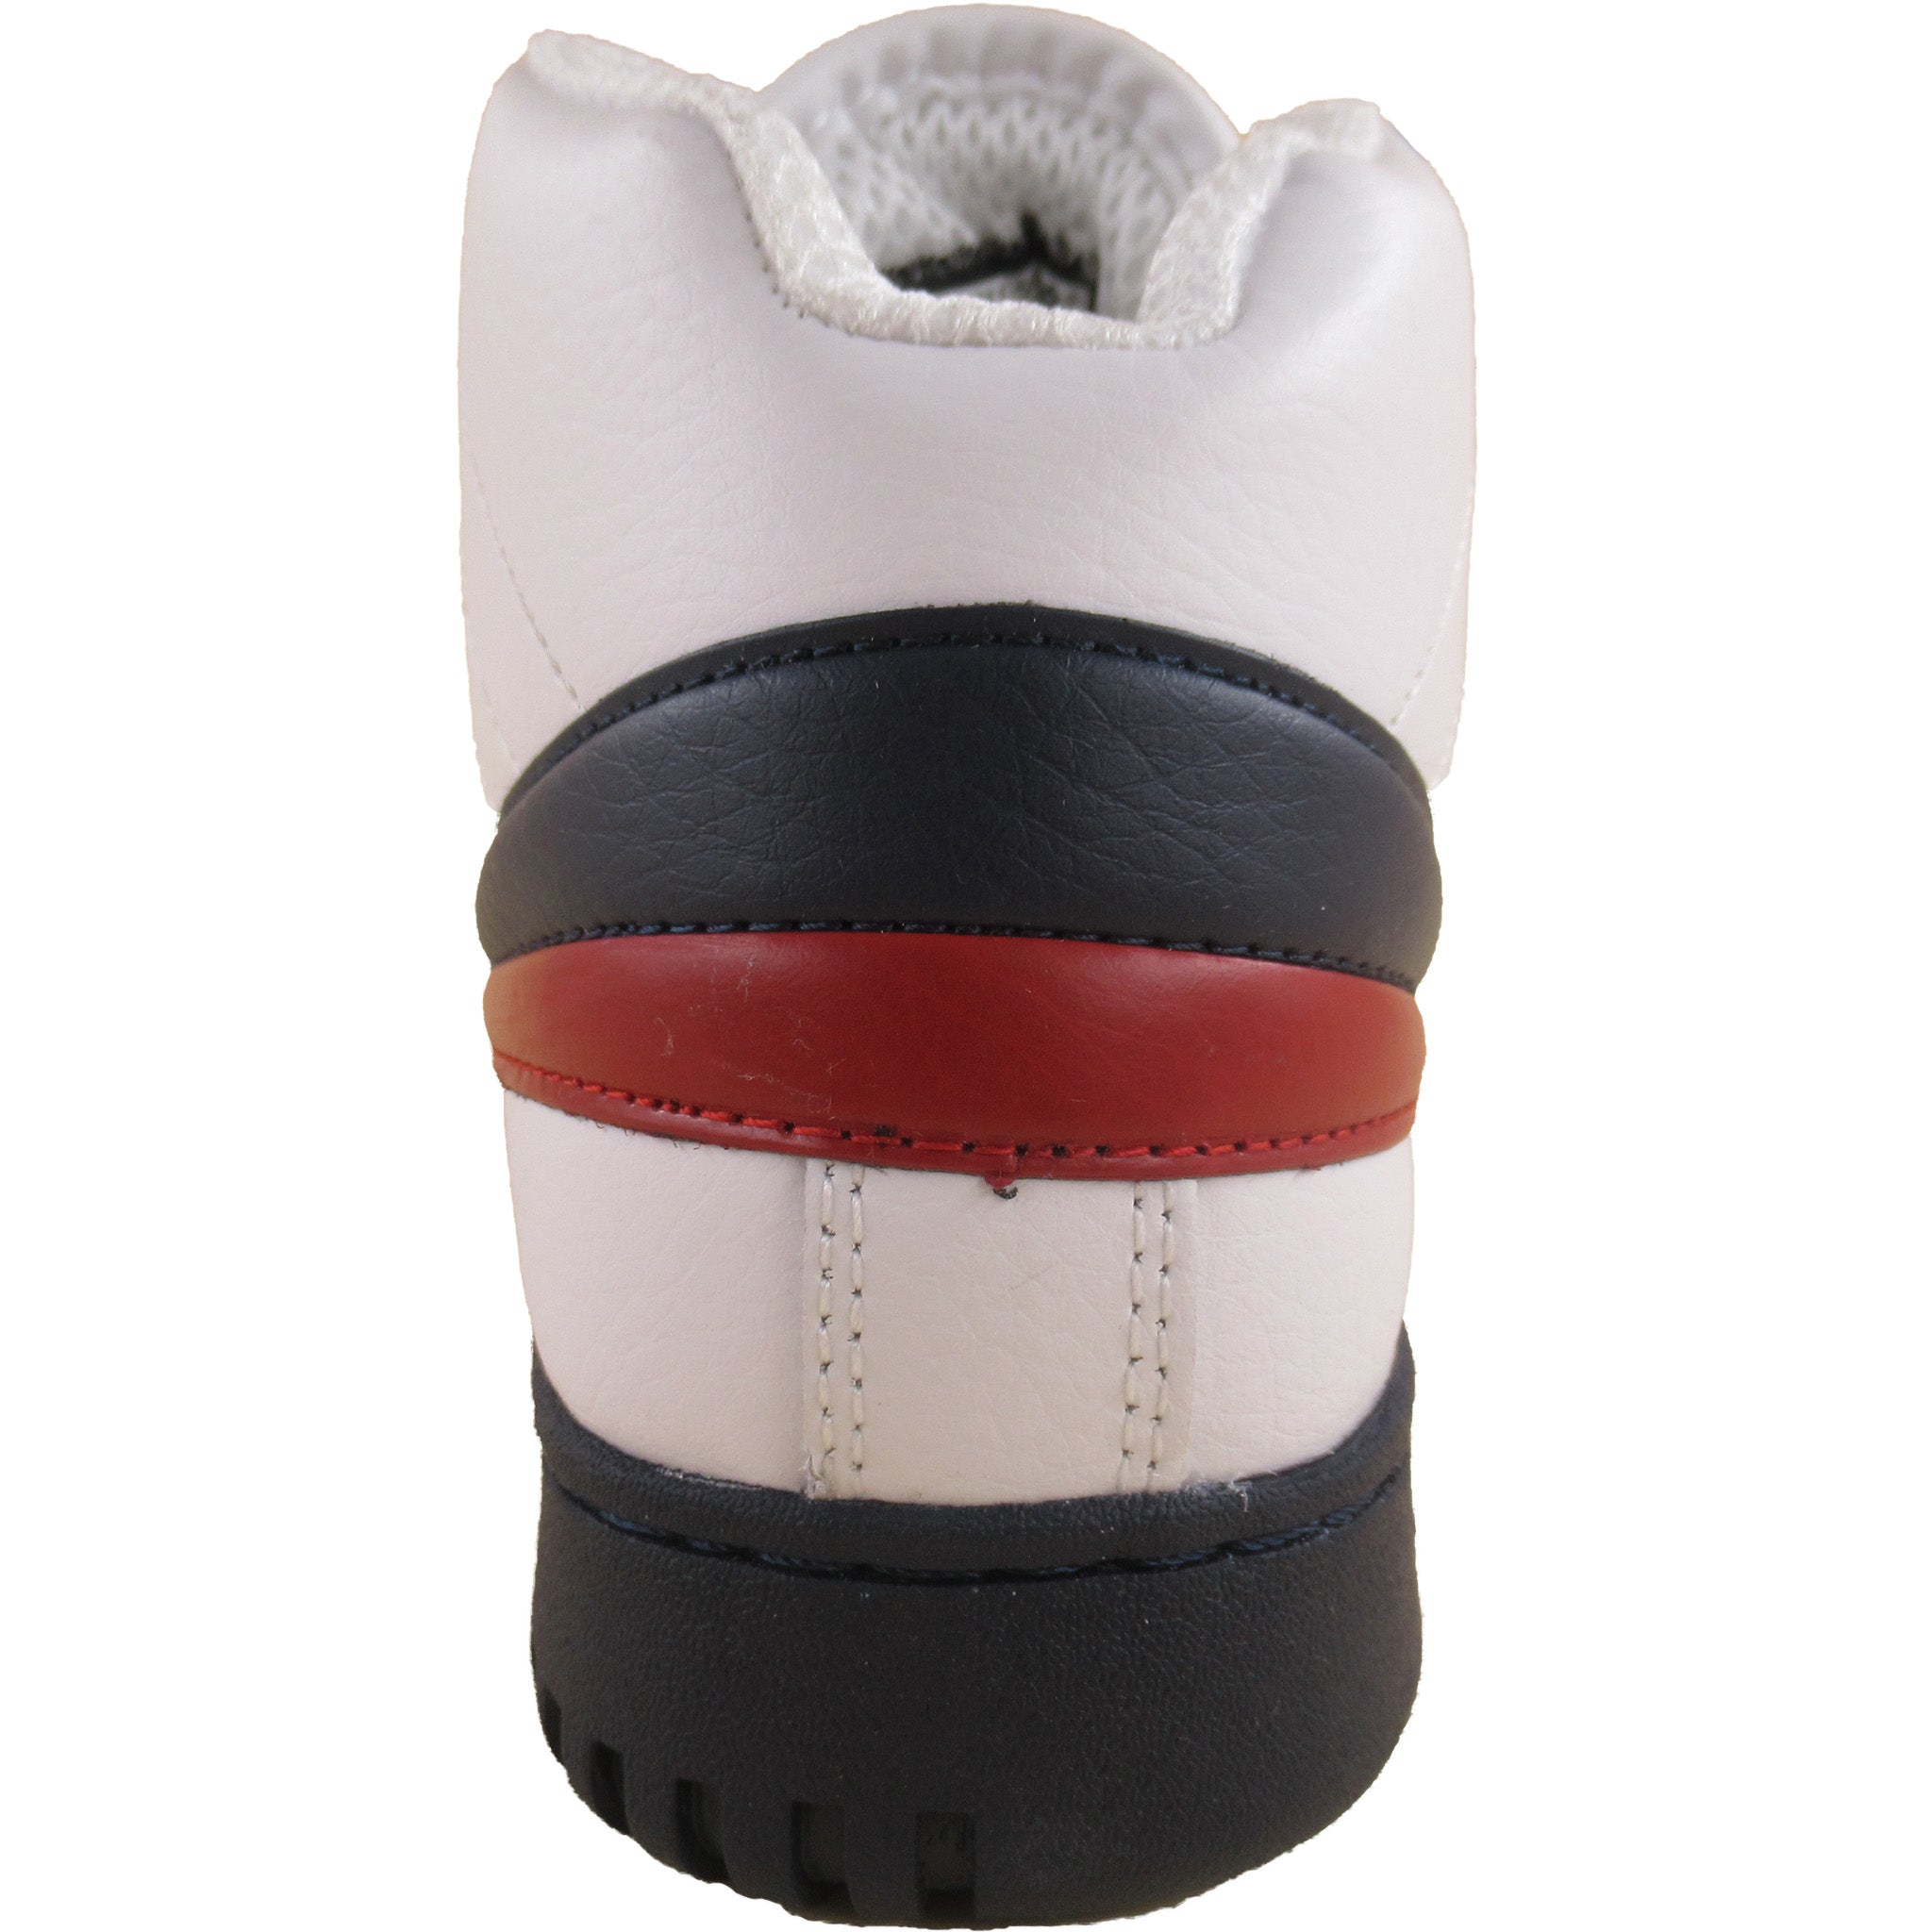 More Red F-13 and Grade-School White Casual Shoes – That Fila Kids Shoe Athletic Store Navy